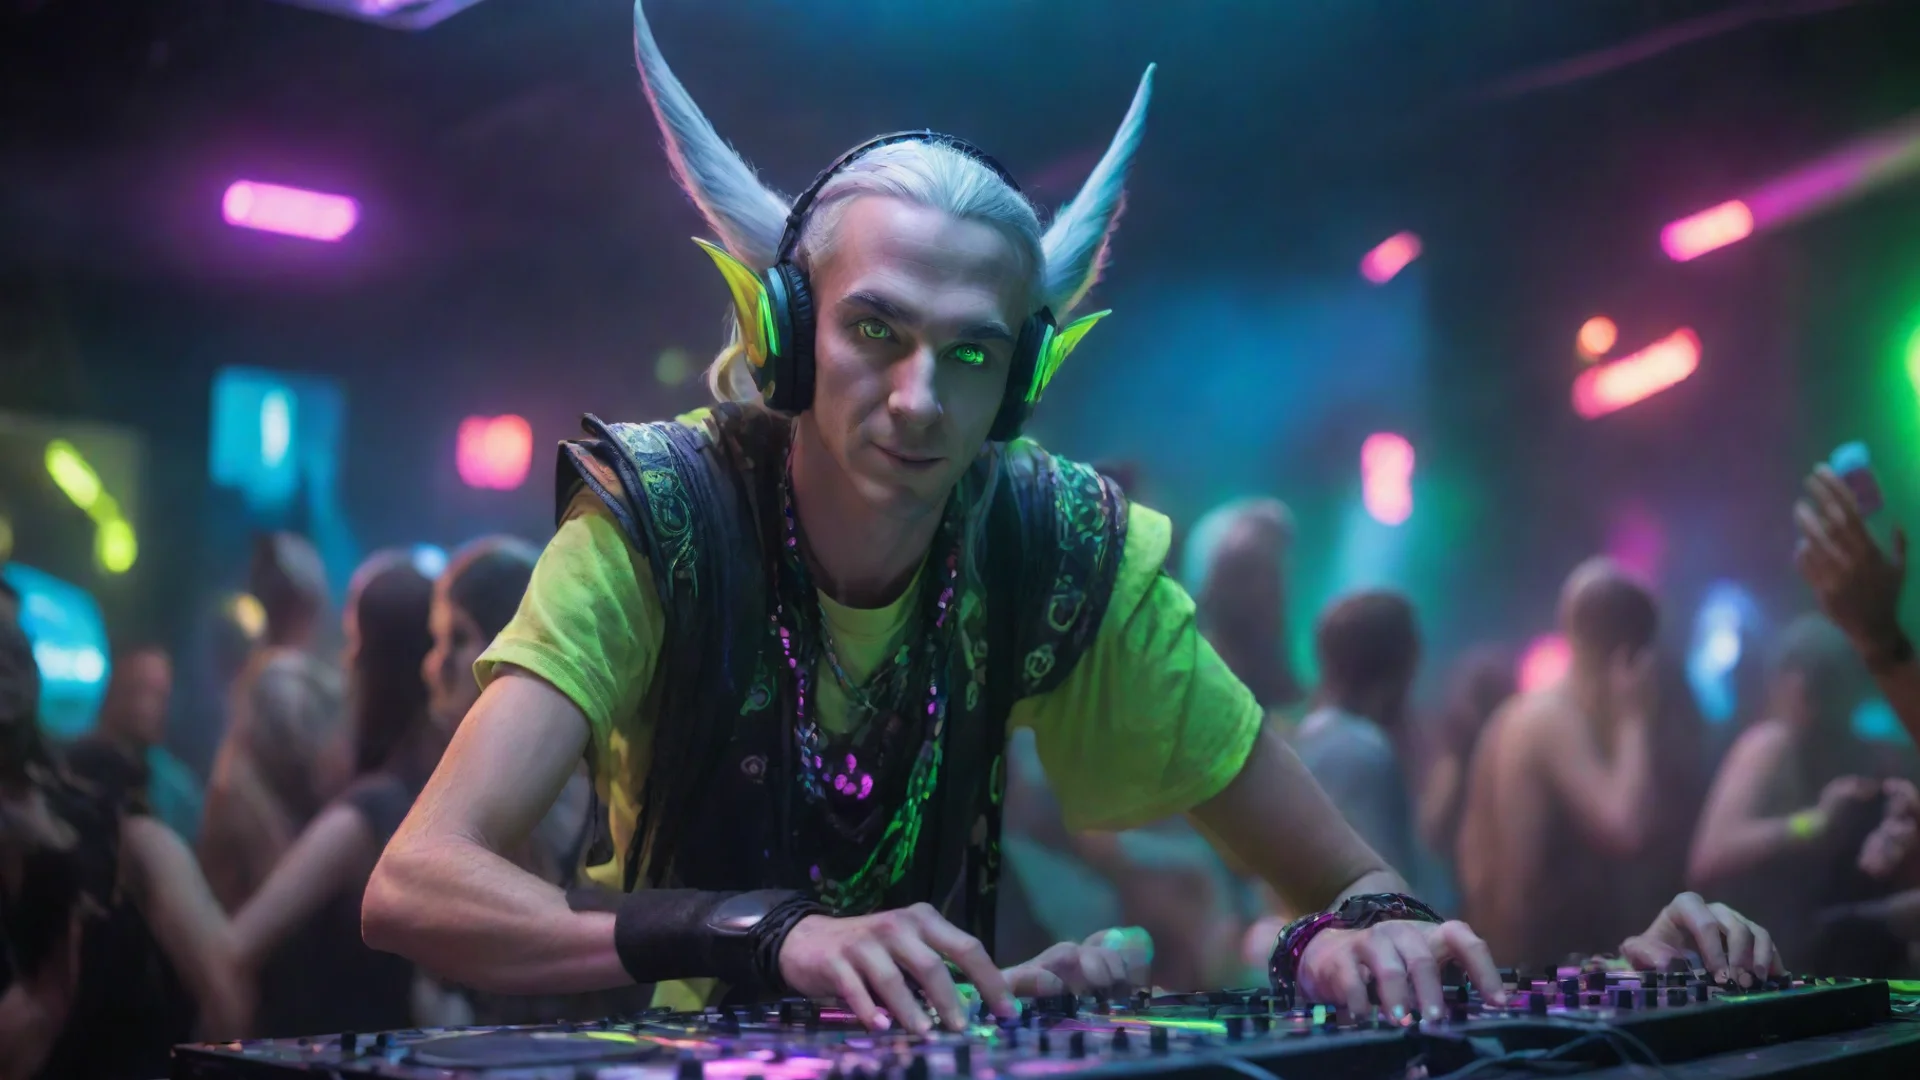 aiamazing high elf dj at a rave with lots of fluorescent elements awesome portrait 2 wide